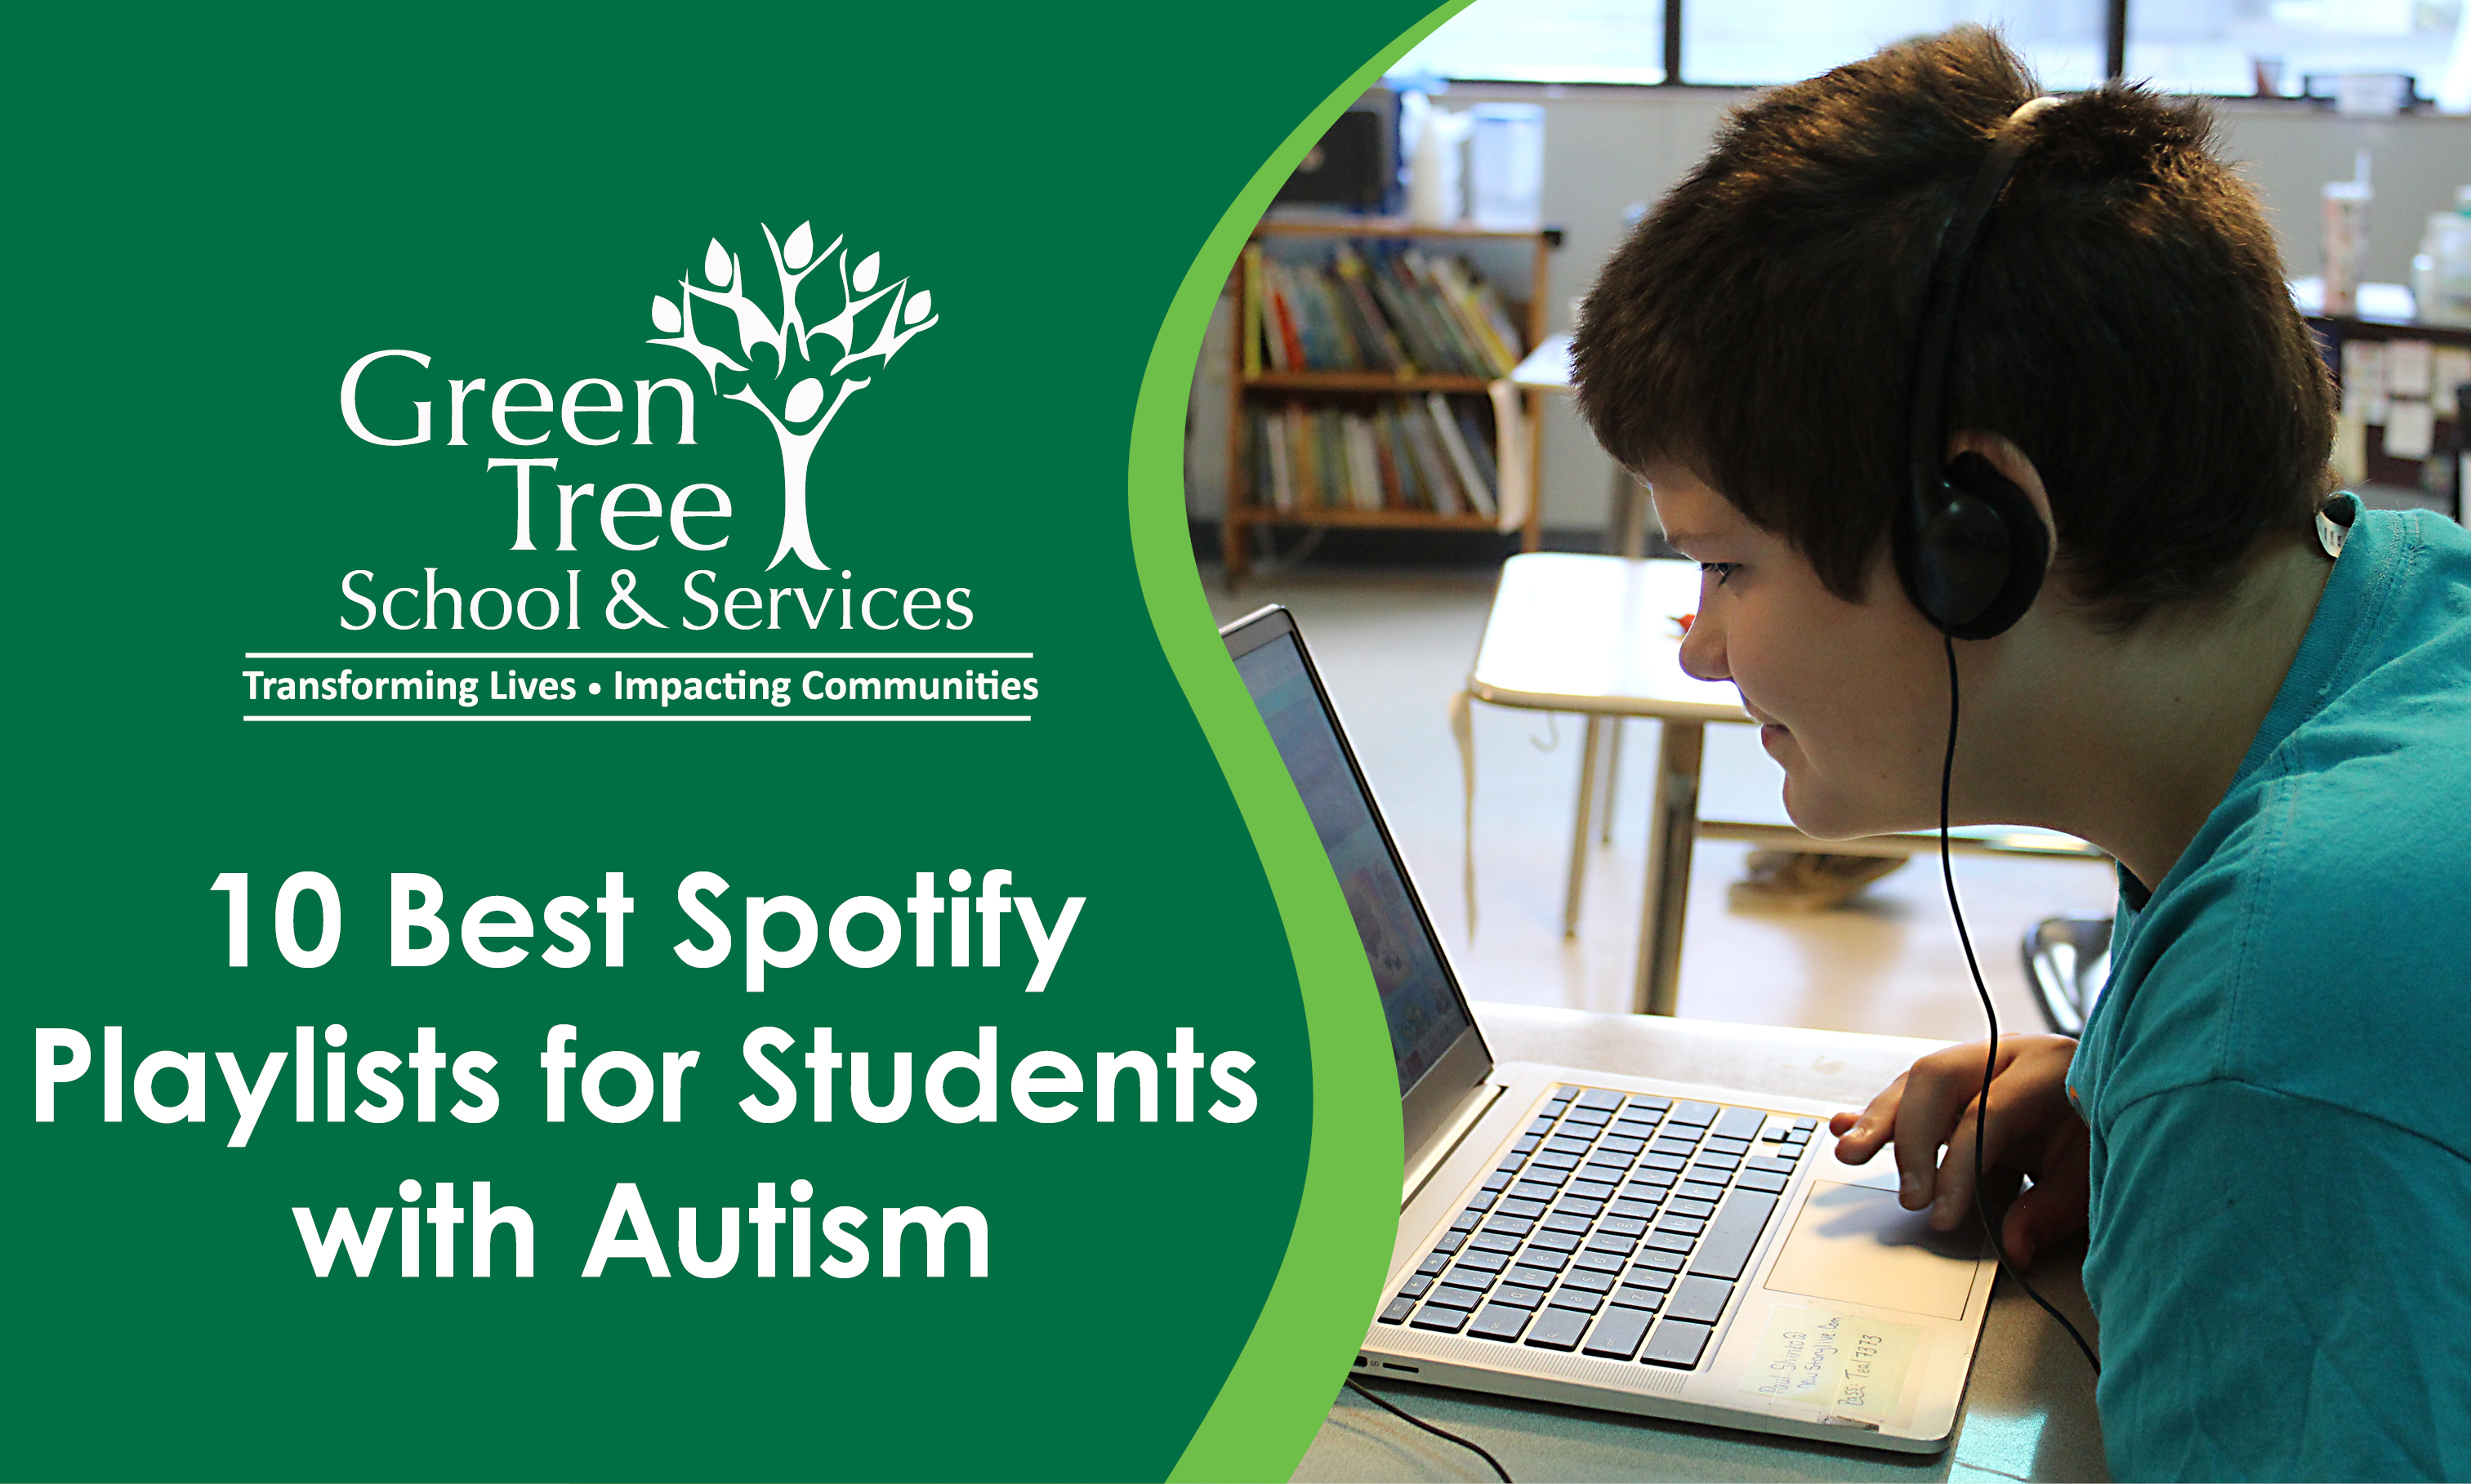 10 Best Spotify Playlists for Students with Autism